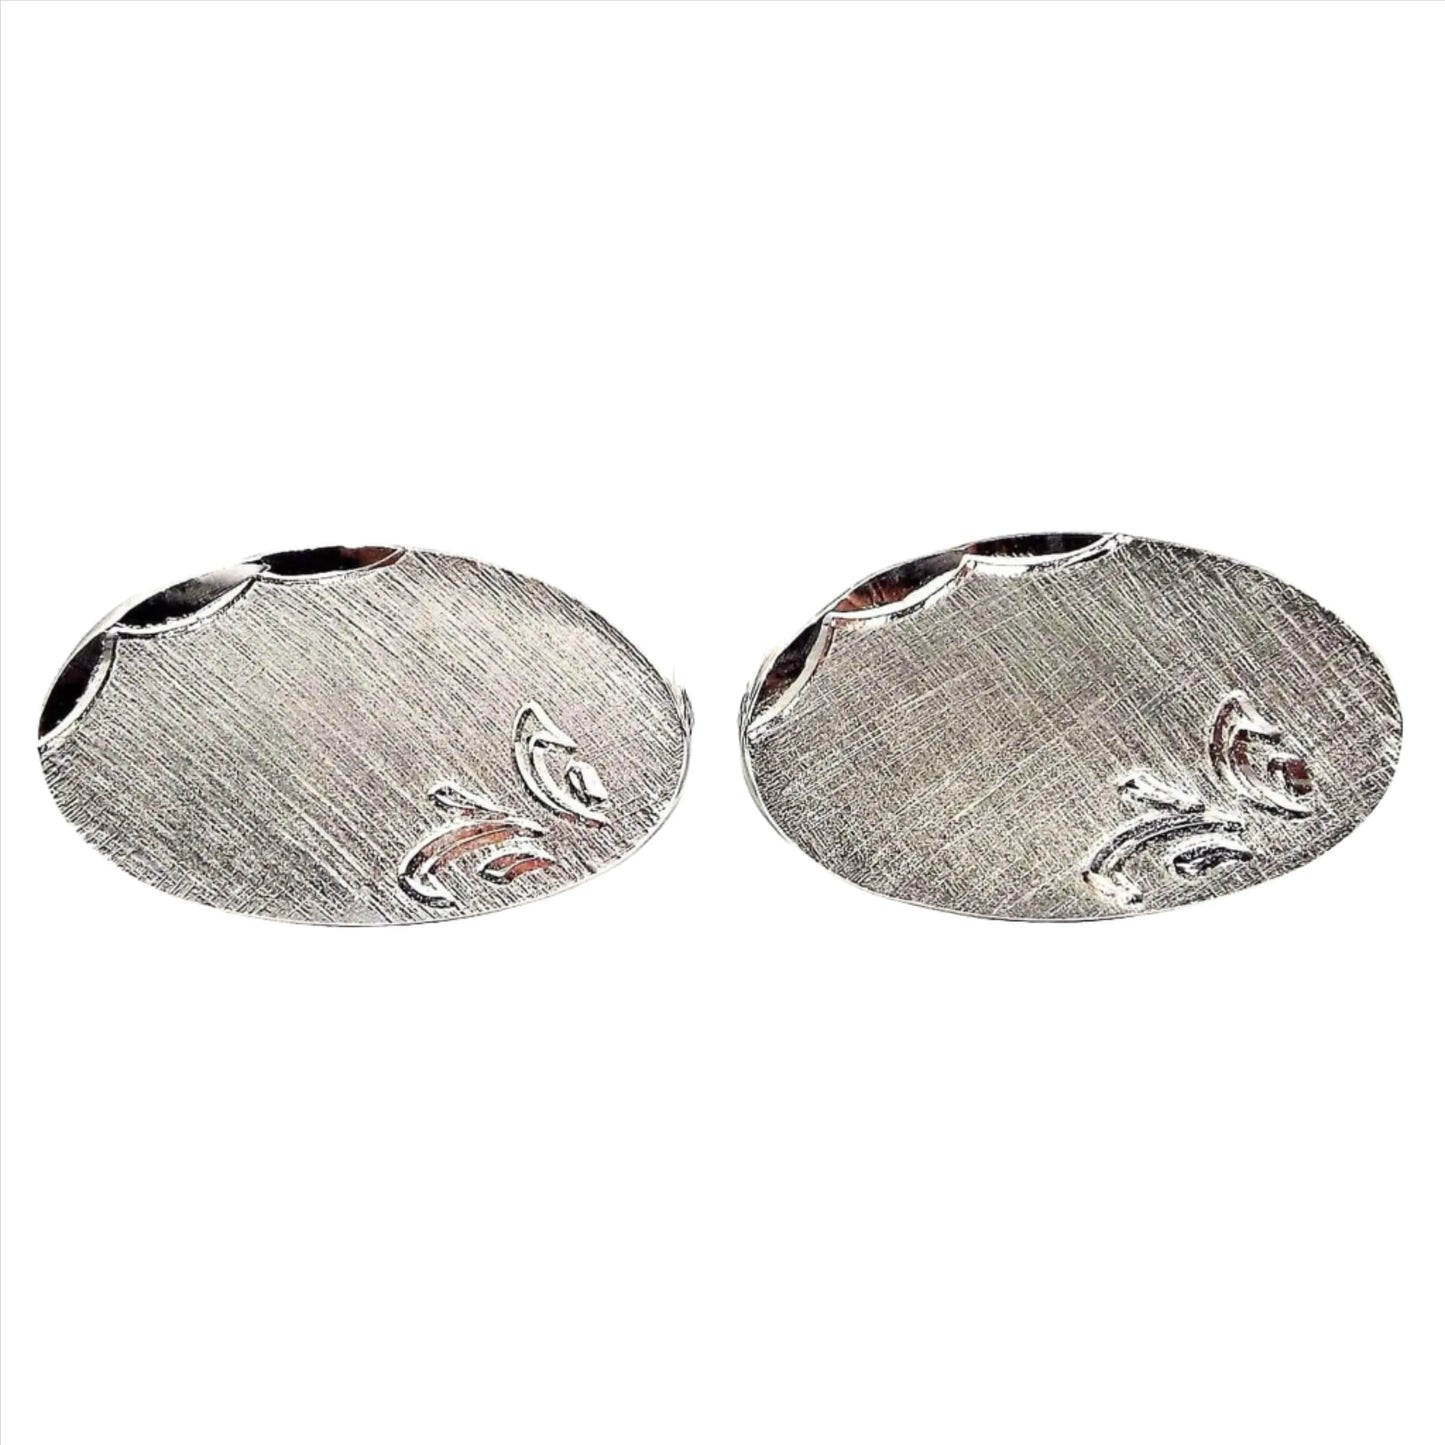 Front view of the Mid Century vintage Shields cufflinks. They are silver tone in color with matte brushed fronts. There is a faceted edge on the top side and a leaf like design etched on the other corner. They are shaped like ovals.